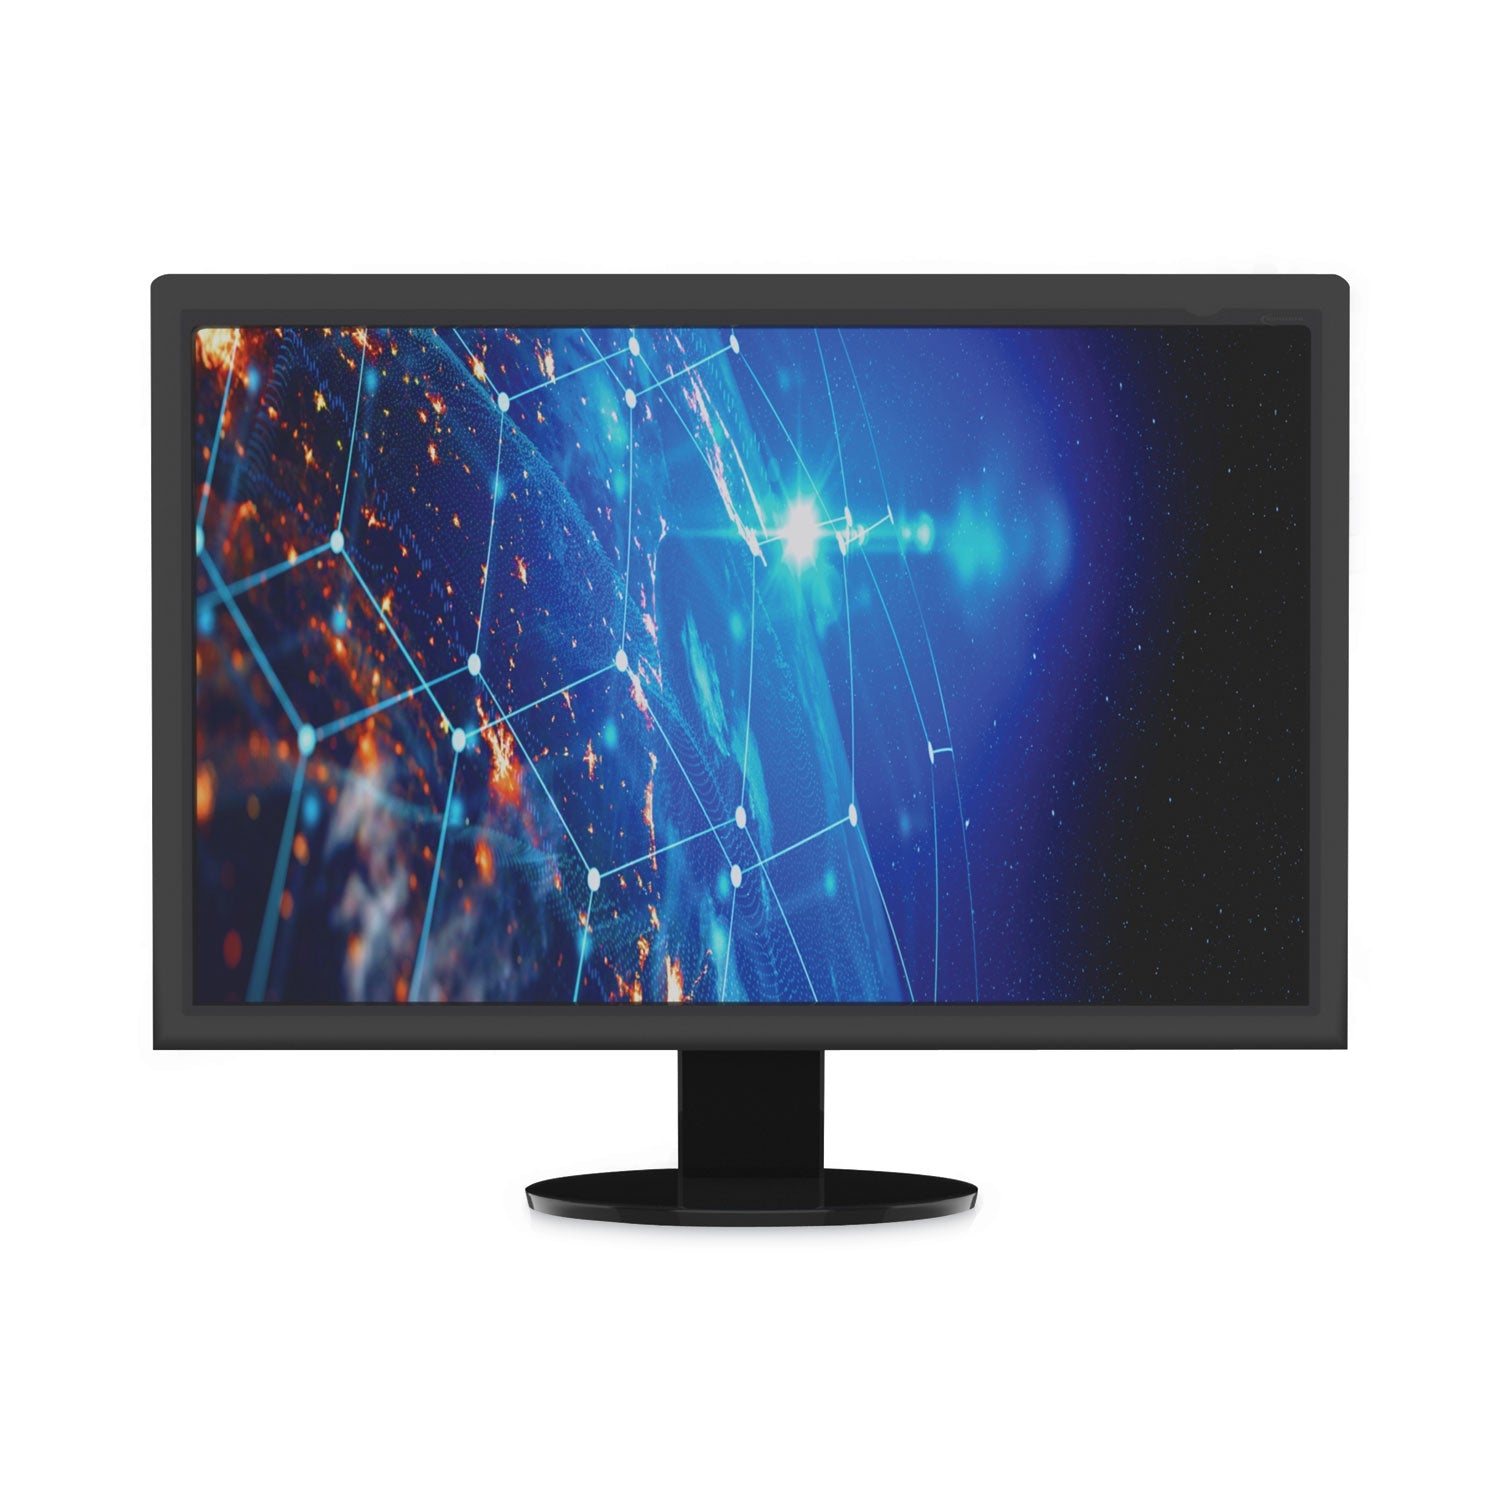 blackout-privacy-filter-for-30-widescreen-flat-panel-monitor-1610-aspect-ratio_ivrblf30w - 4